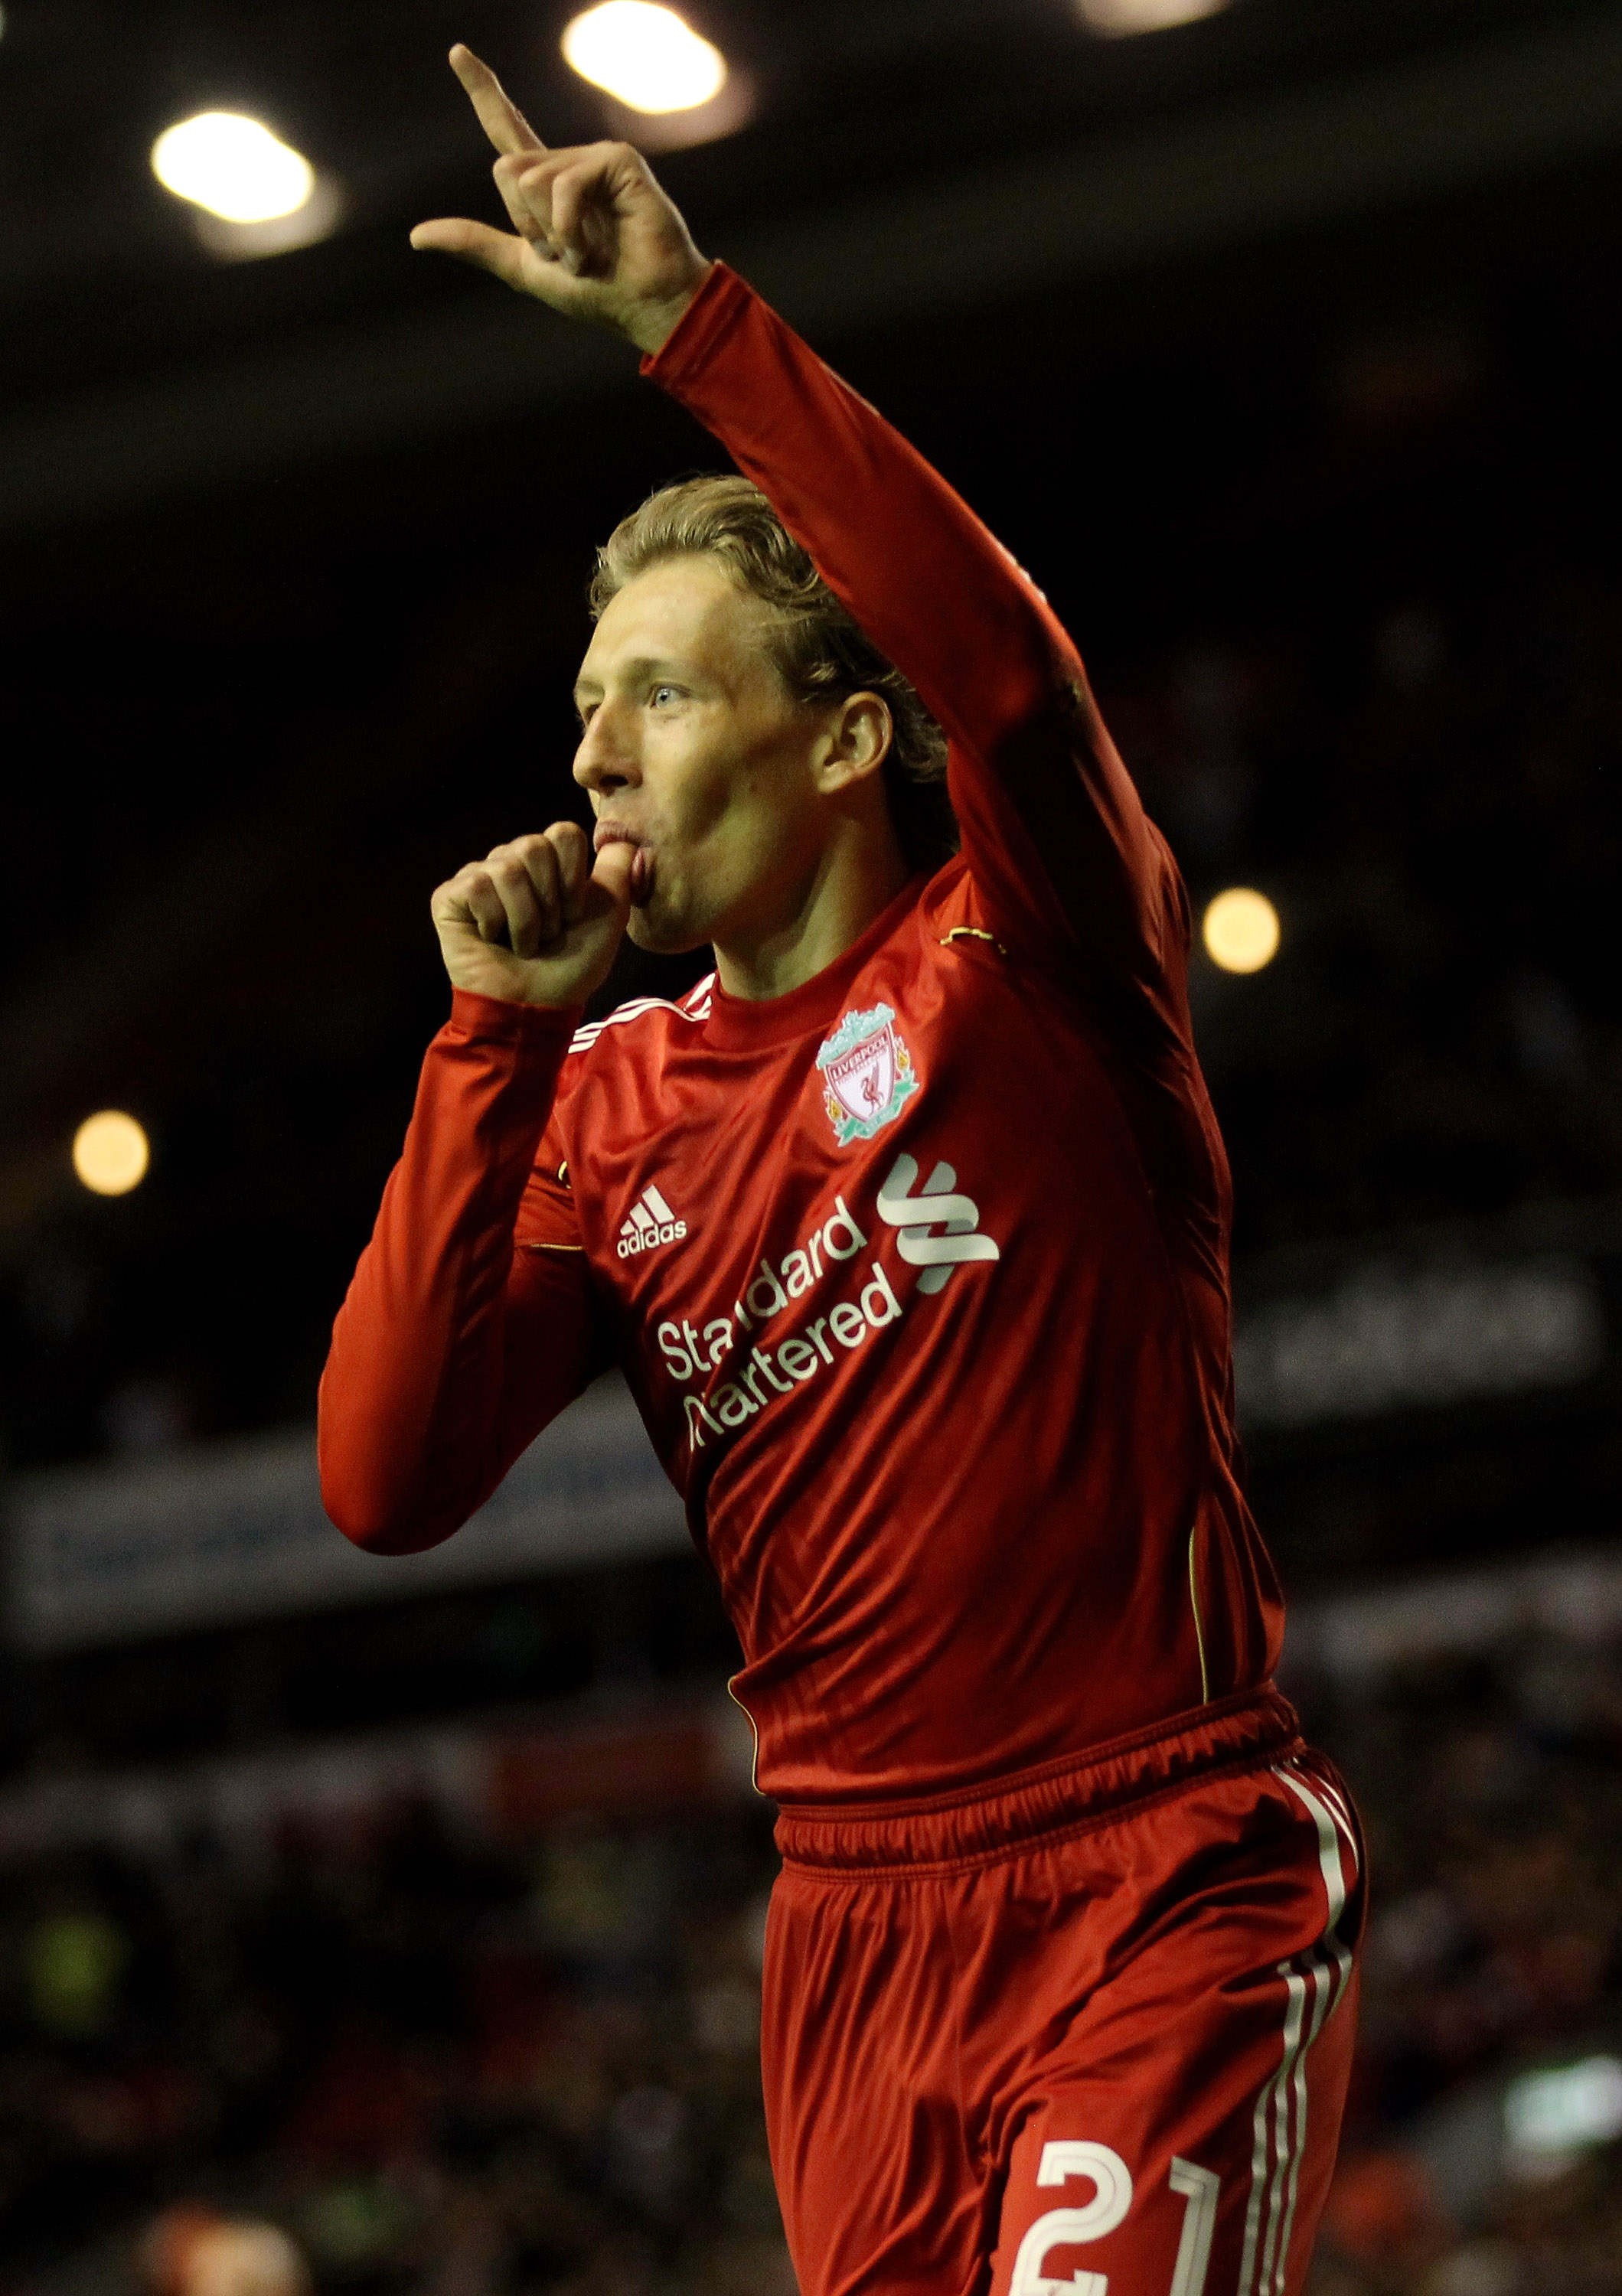 LIVERPOOL, ENGLAND - SEPTEMBER 16 : Lucas of Liverpool celebrates scoring his team's third goal during the UEFA Europa League Group K match beteween Liverpool and Steaua Bucharest at Anfield on September 16, 2010 in Liverpool, England.  (Photo by Alex Liv